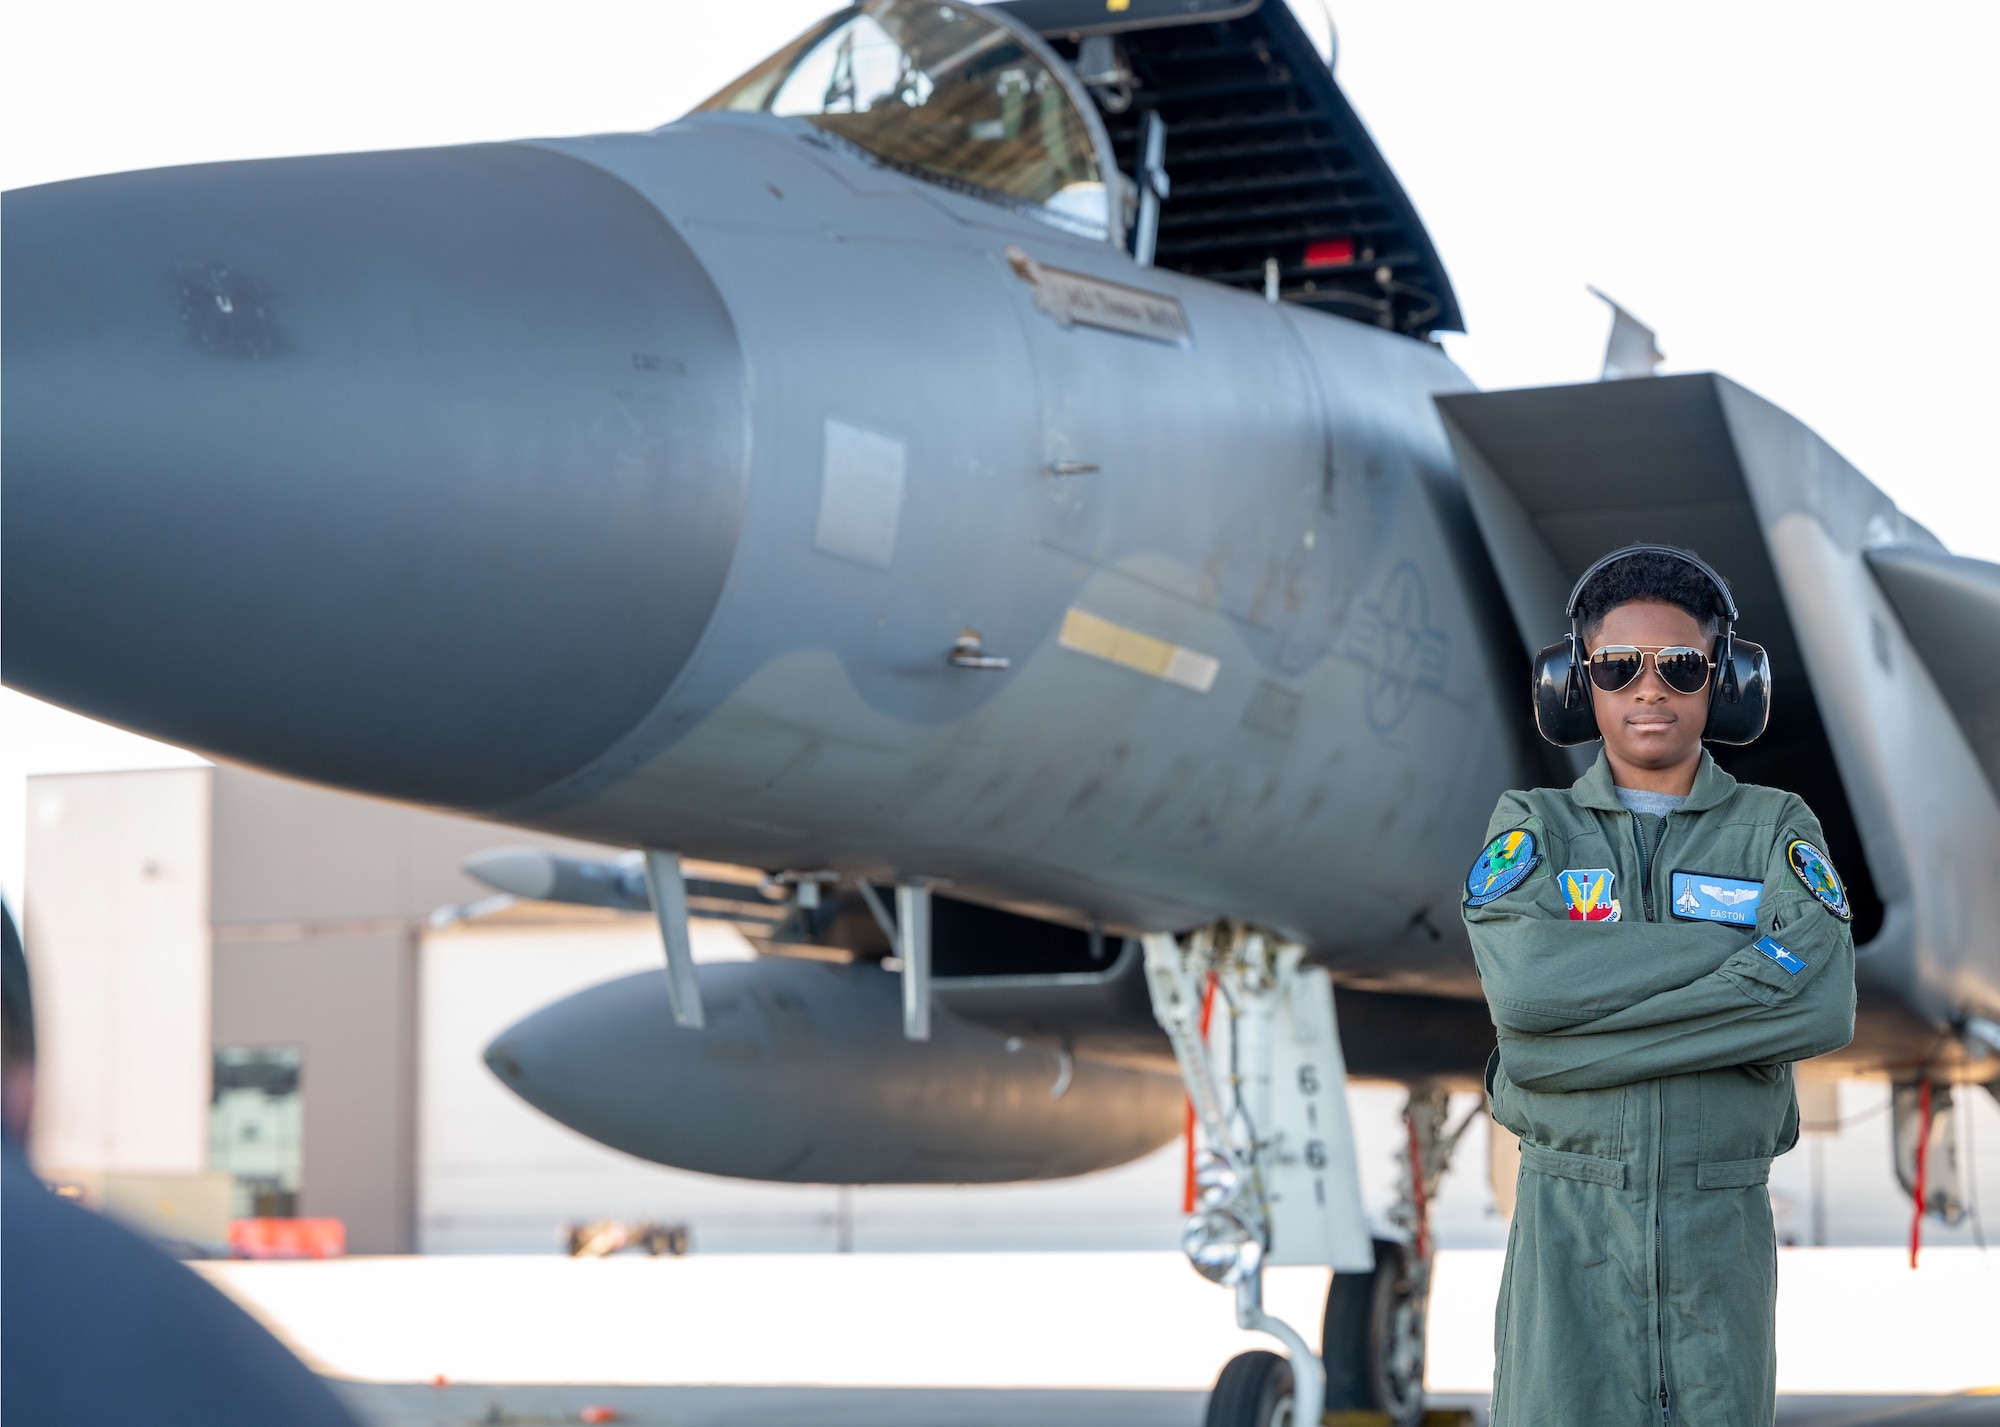 The 125th Fighter Wing, in collaboration with the Make-A-Wish organization, fulfilled the wish of 10-year-old Easton to become a fighter pilot at the Jacksonville Air National Guard Base, Florida, Dec. 7, 2023. Easton underwent an exciting transformation as he stepped into the shoes of an F-15C Eagle fighter pilot for the day. The day included a swear-in ceremony, a tour of the flight line where he had the opportunity to watch jets takeoff, a sit inside the cockpit of an F-15, and tours of the fire department and air traffic control tower located at Jacksonville International Airport. For the tour, Easton wore a custom made flight suit as an honorary “eagle driver” and was granted the aviator call sign “Vibin’” by pilots of the 159th Fighter Squadron. (U.S. Air National Guard photo by Tech Sgt. Chelsea Smith)